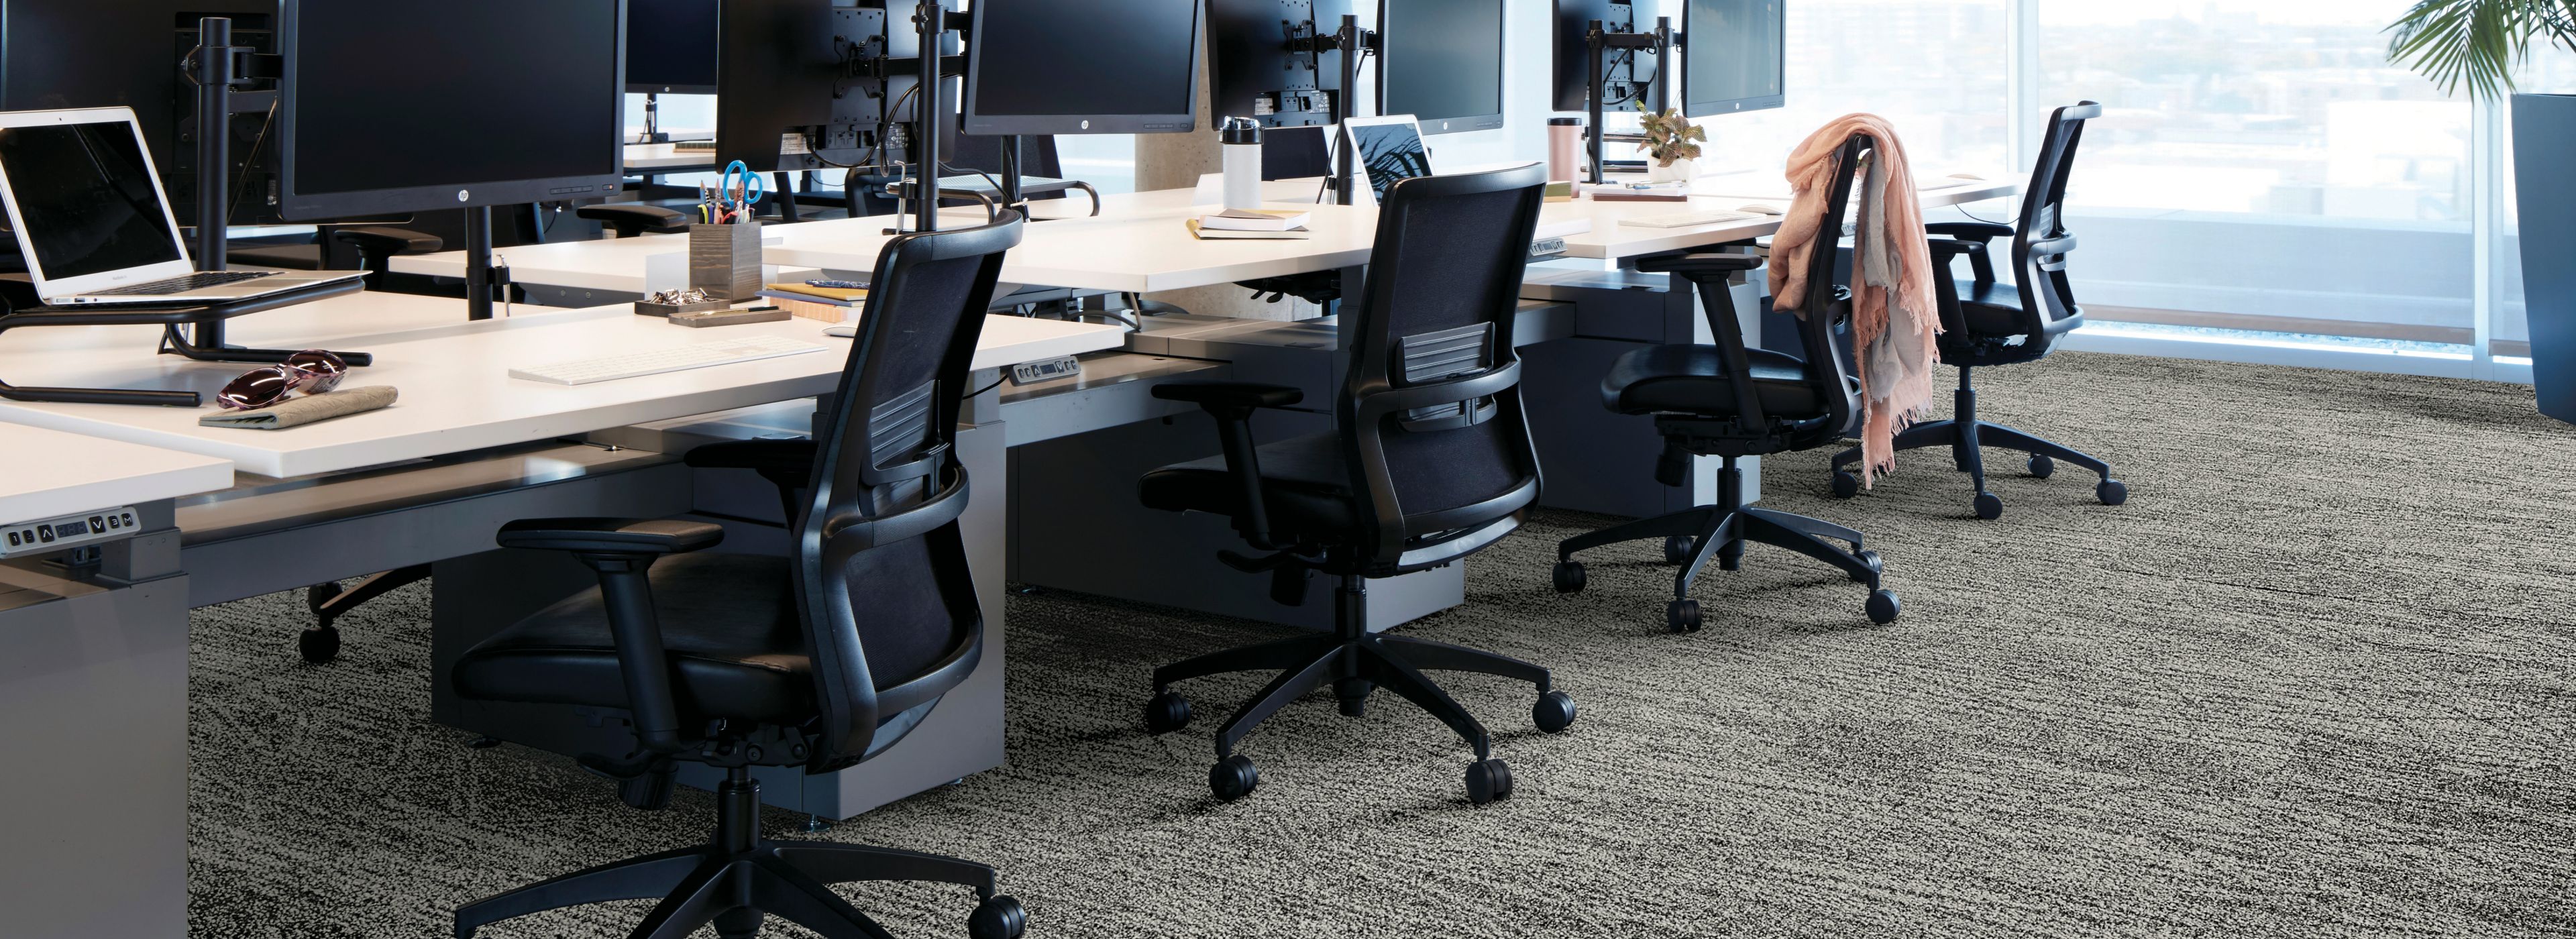 Interface Open Air 409 plank carpet tile with open work stations and cardigan draped over office chair numéro d’image 1